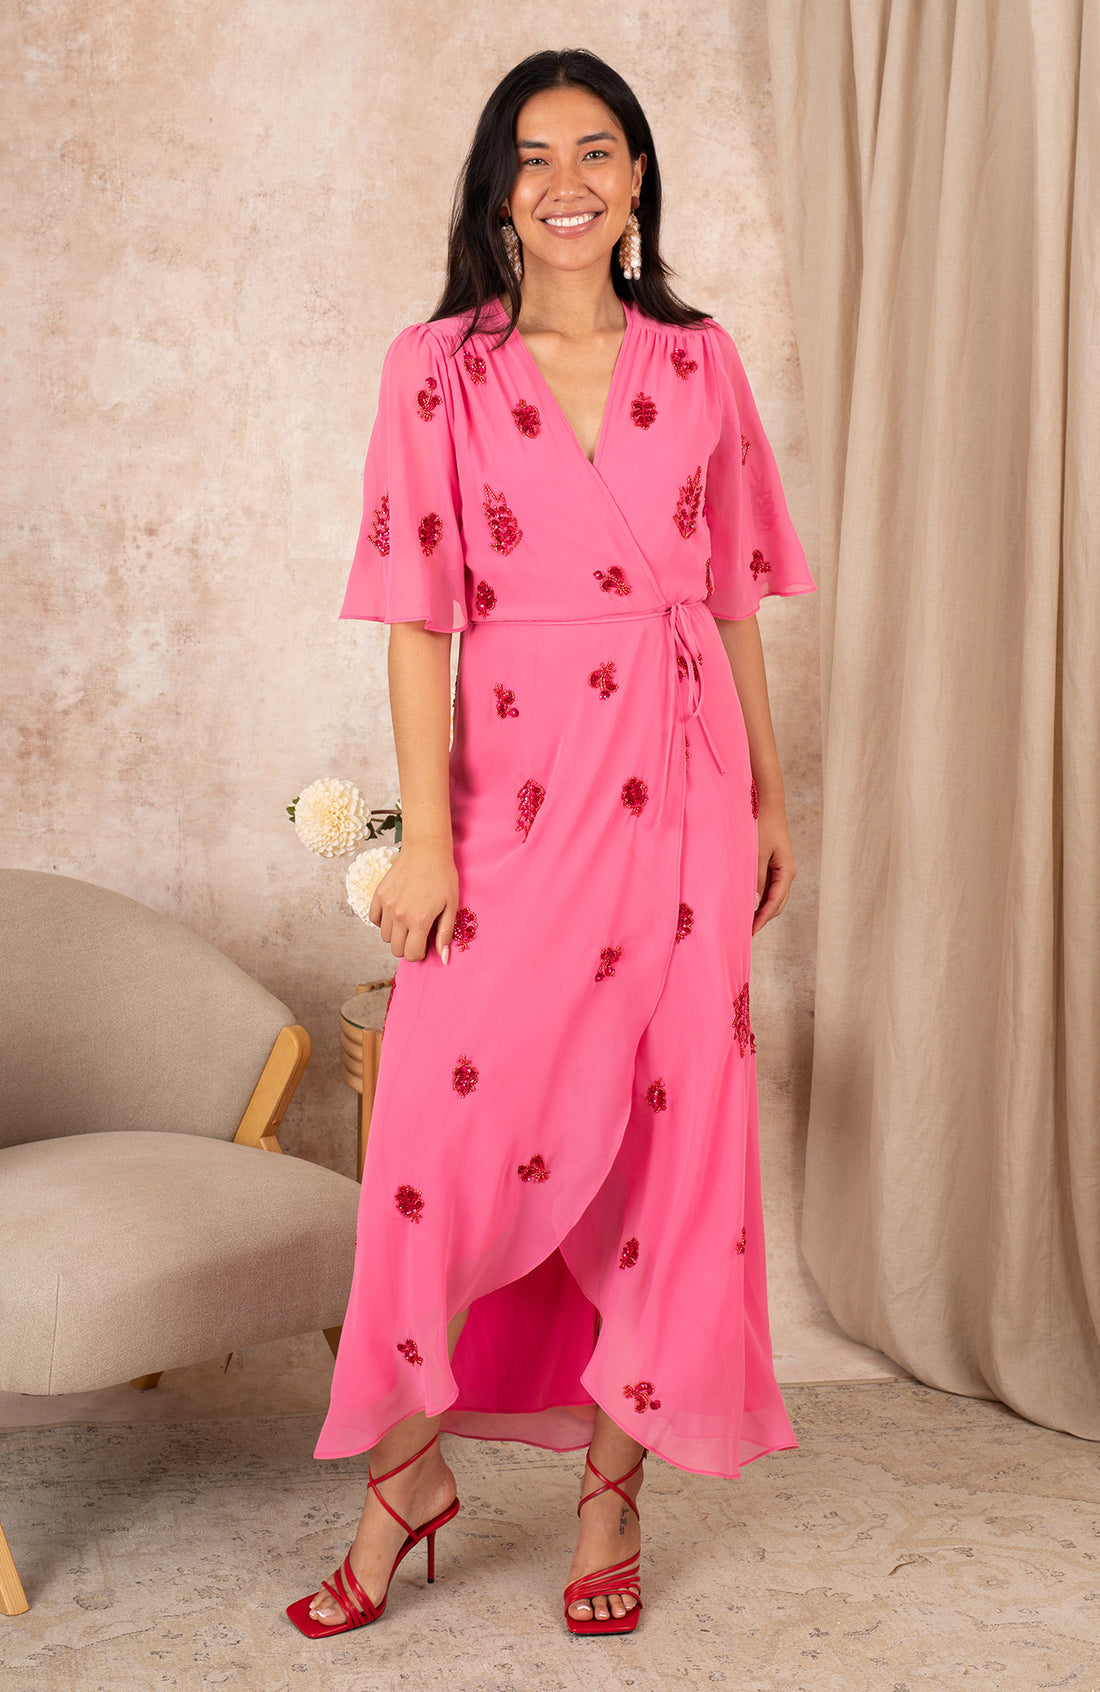 THE HEBE EMBELLISHED WRAP DRESS WITH TIE WAIST AND FLUTTER SLEEVE (PINK/RED) CURVE